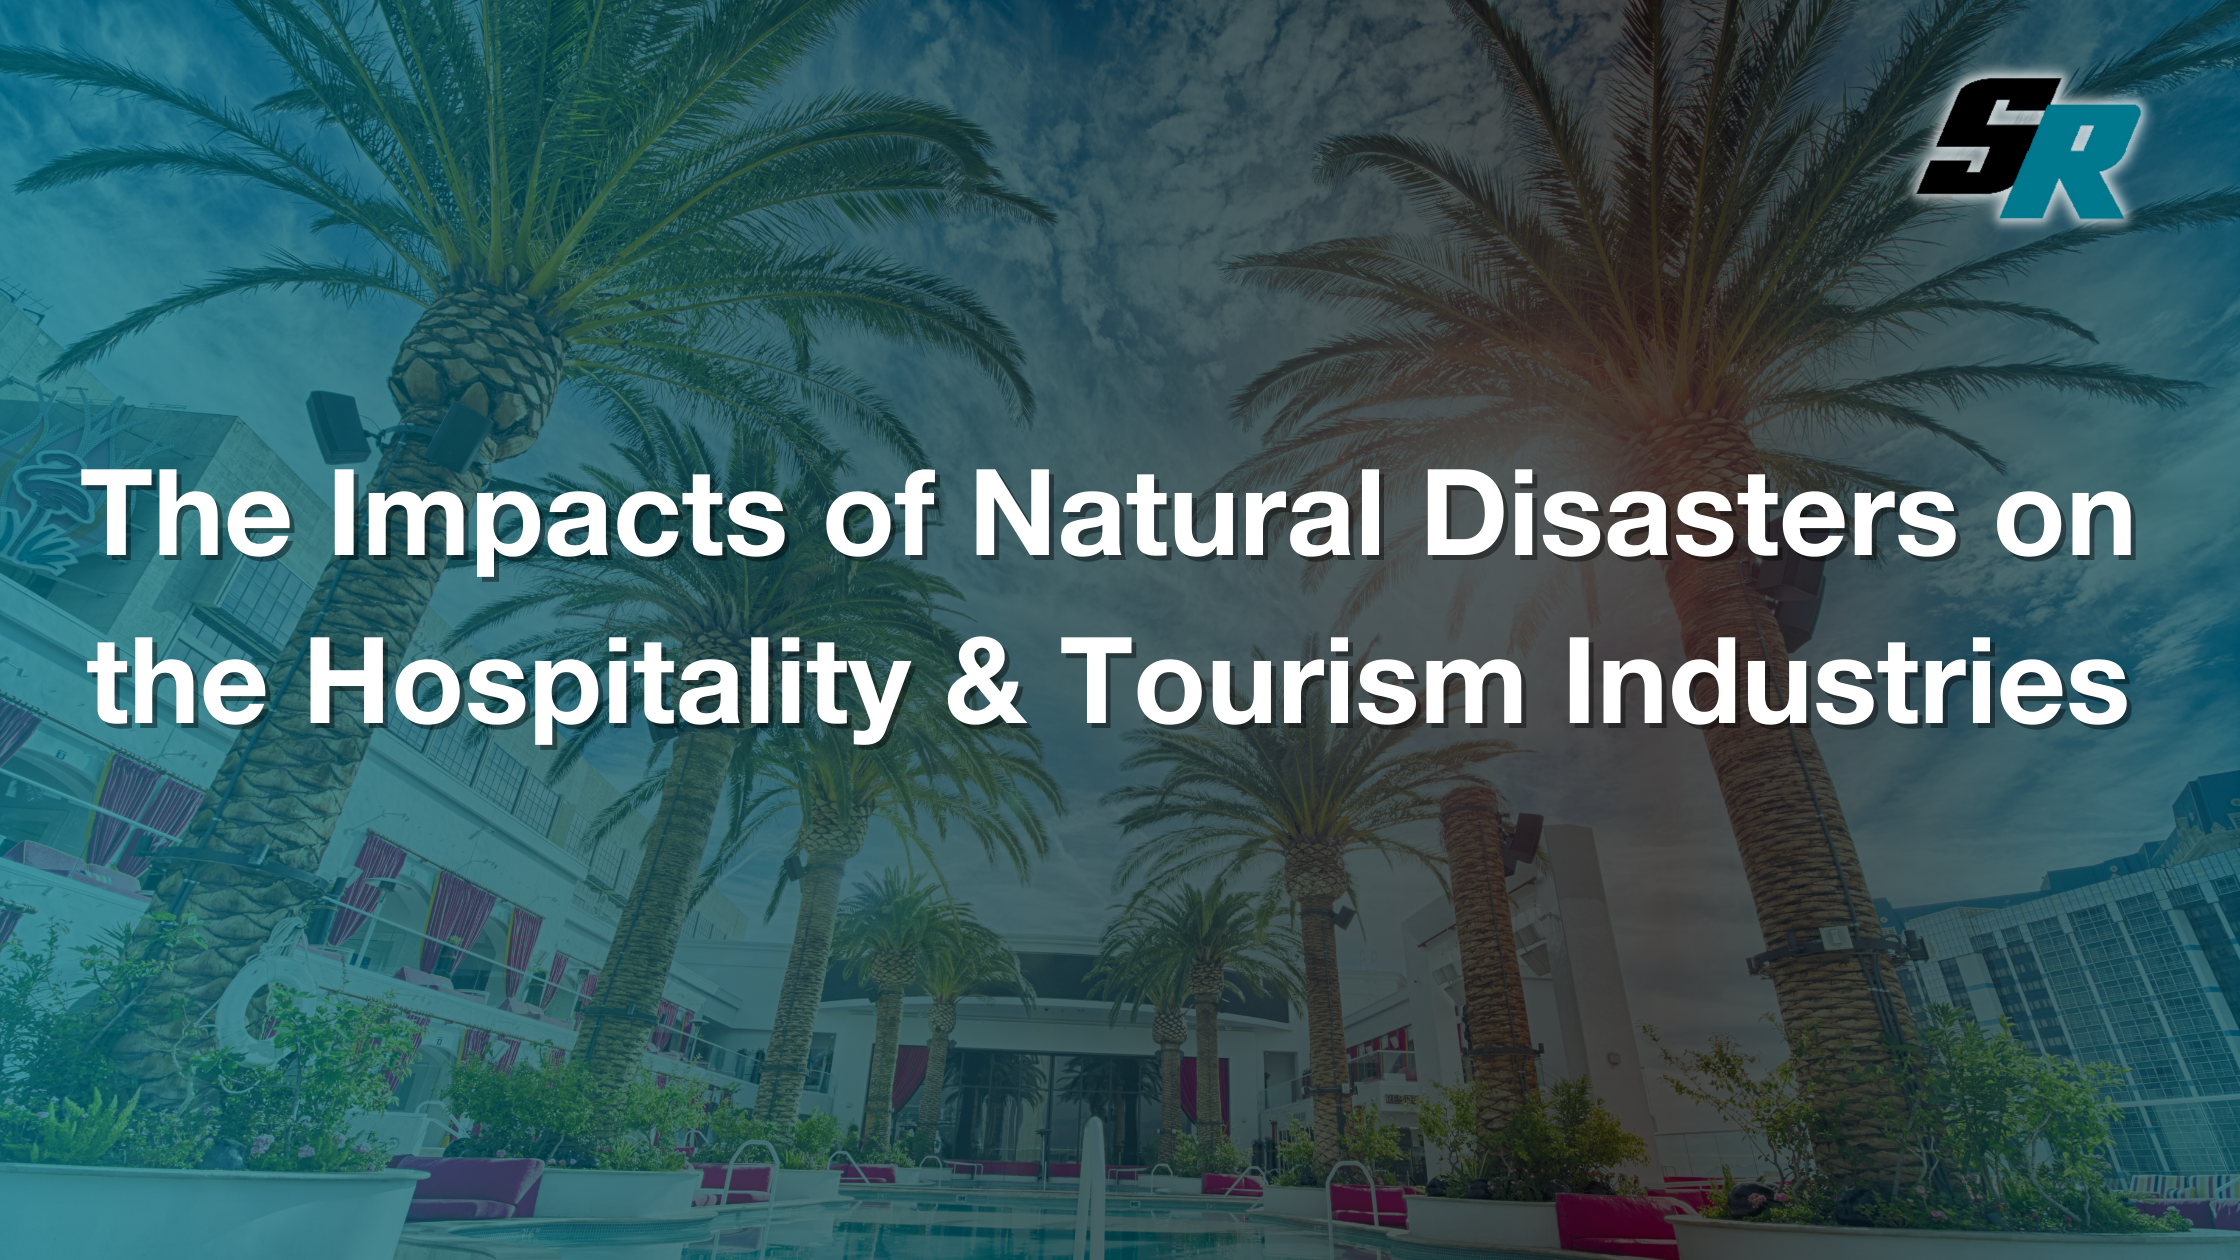 The Impacts of Natural Disasters on the Hospitality & Tourism Industries